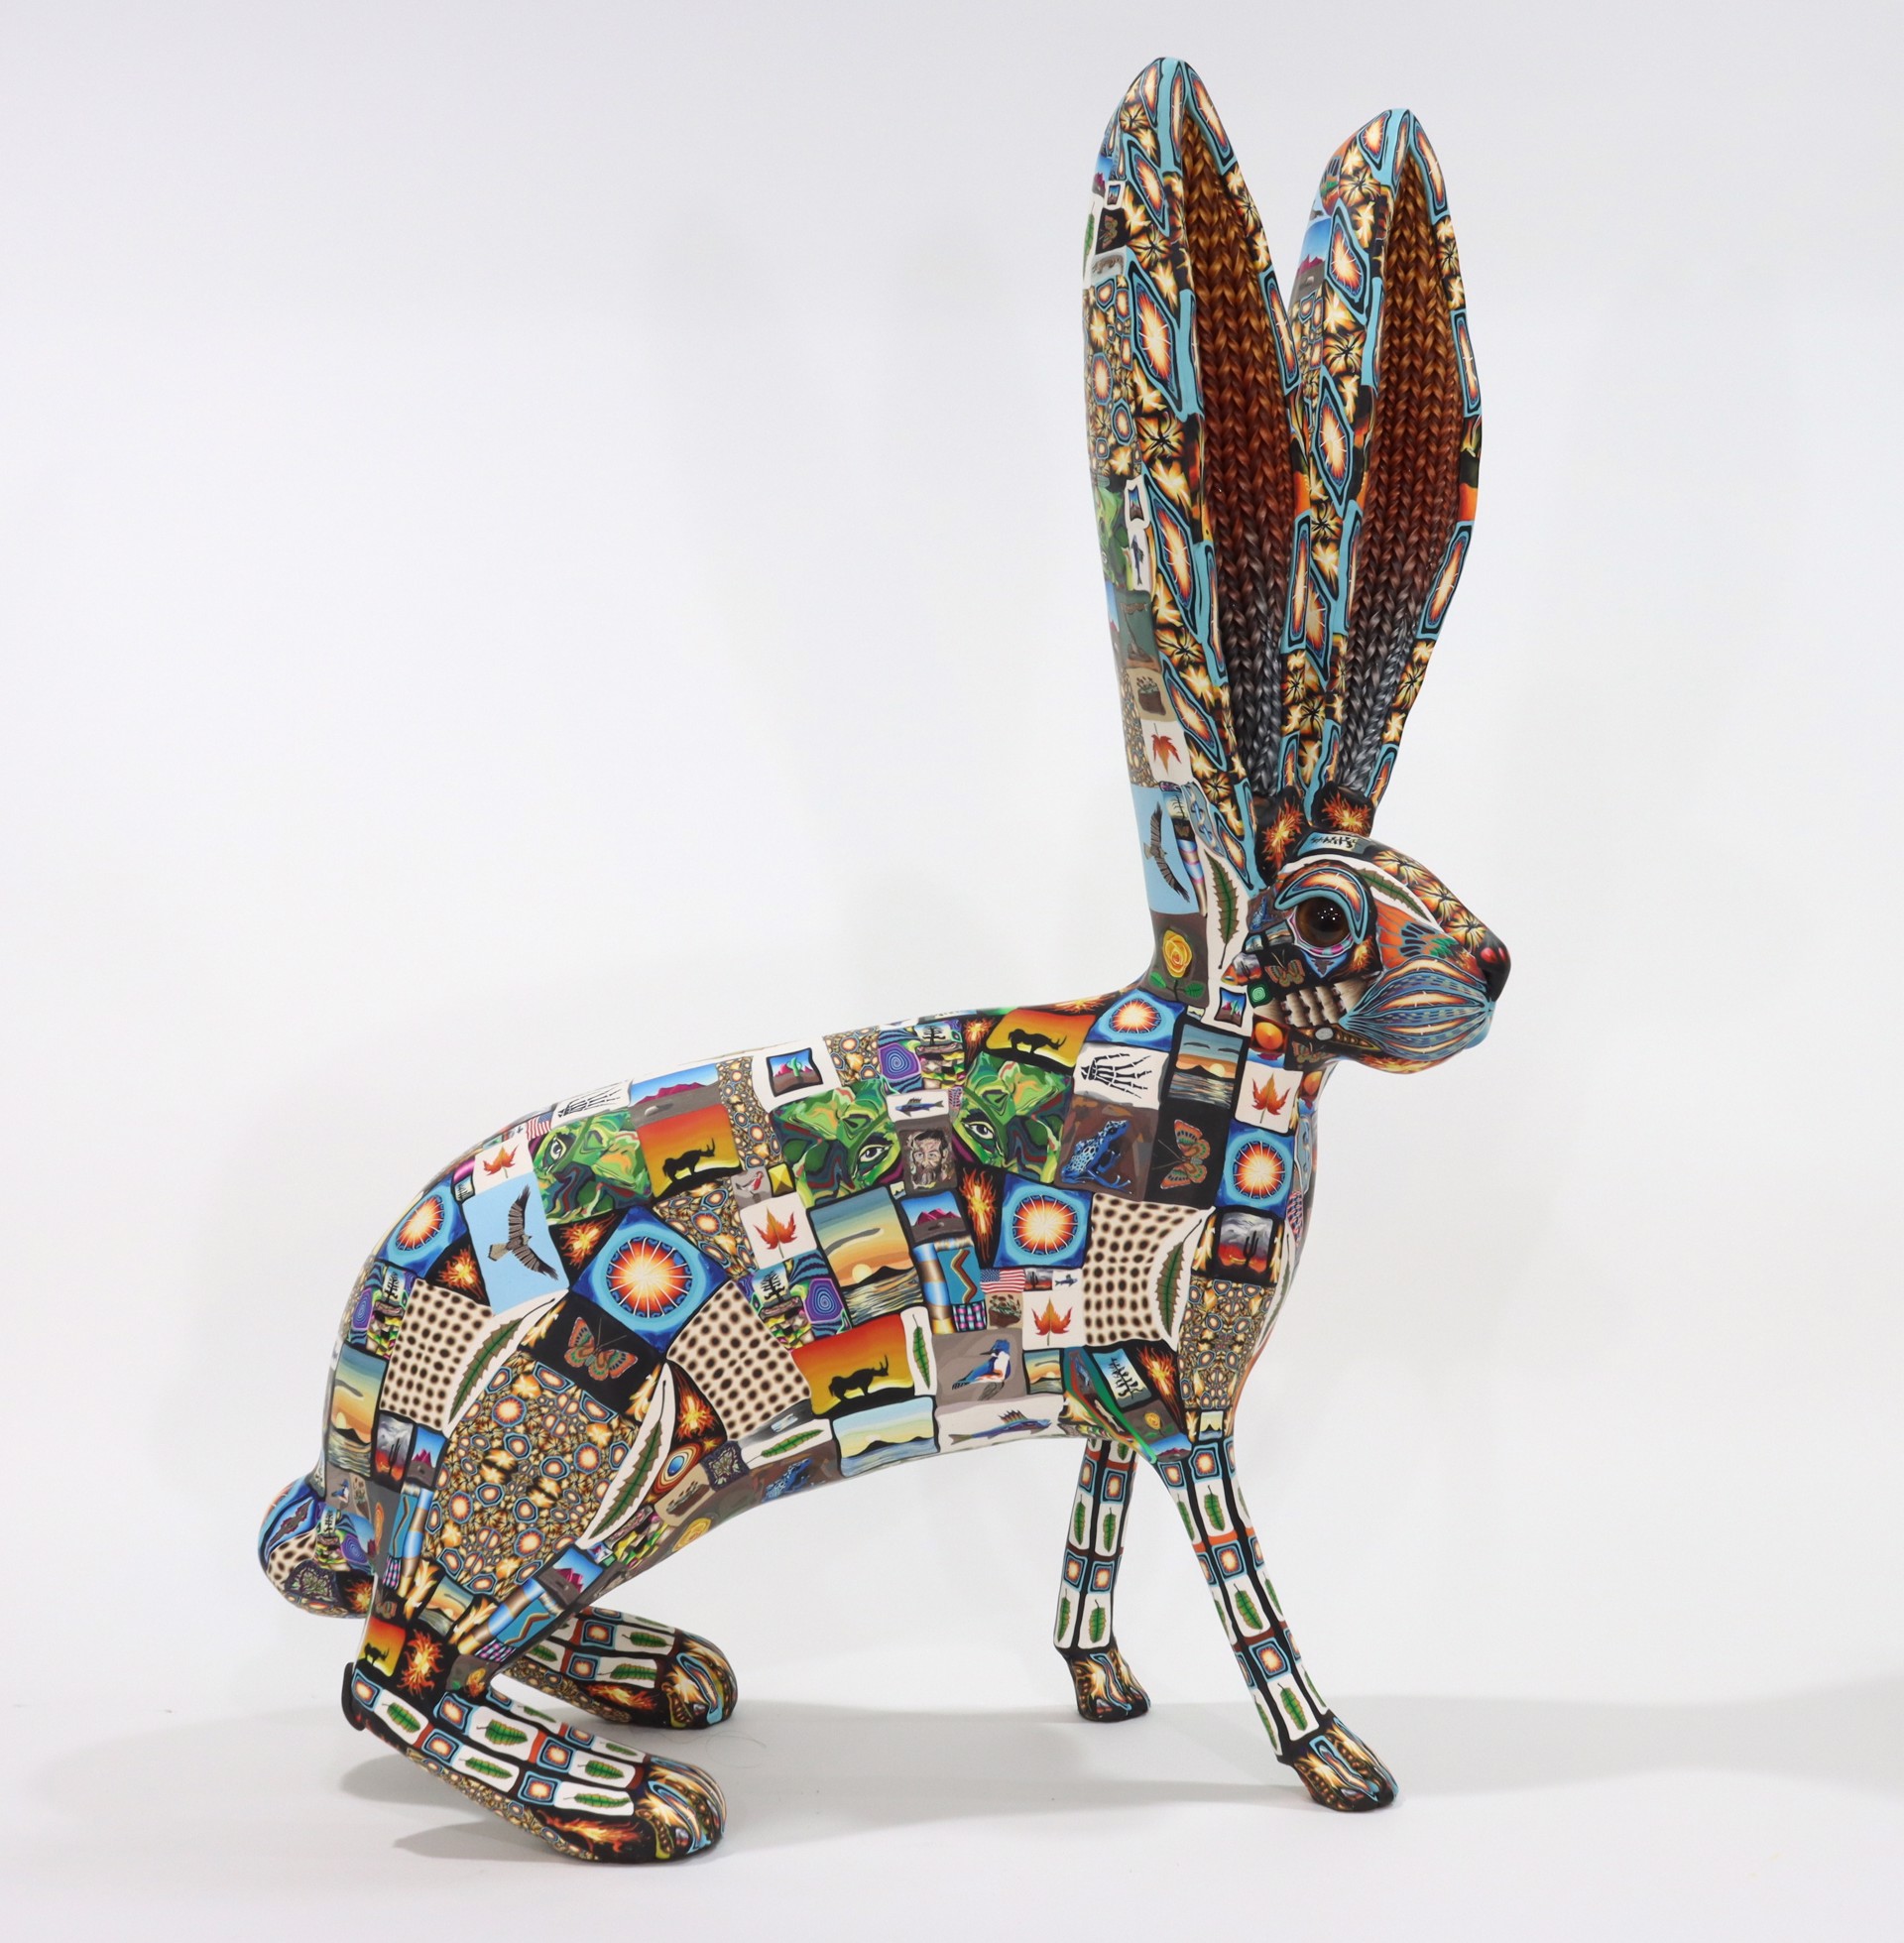 Hare by Adam Thomas Rees